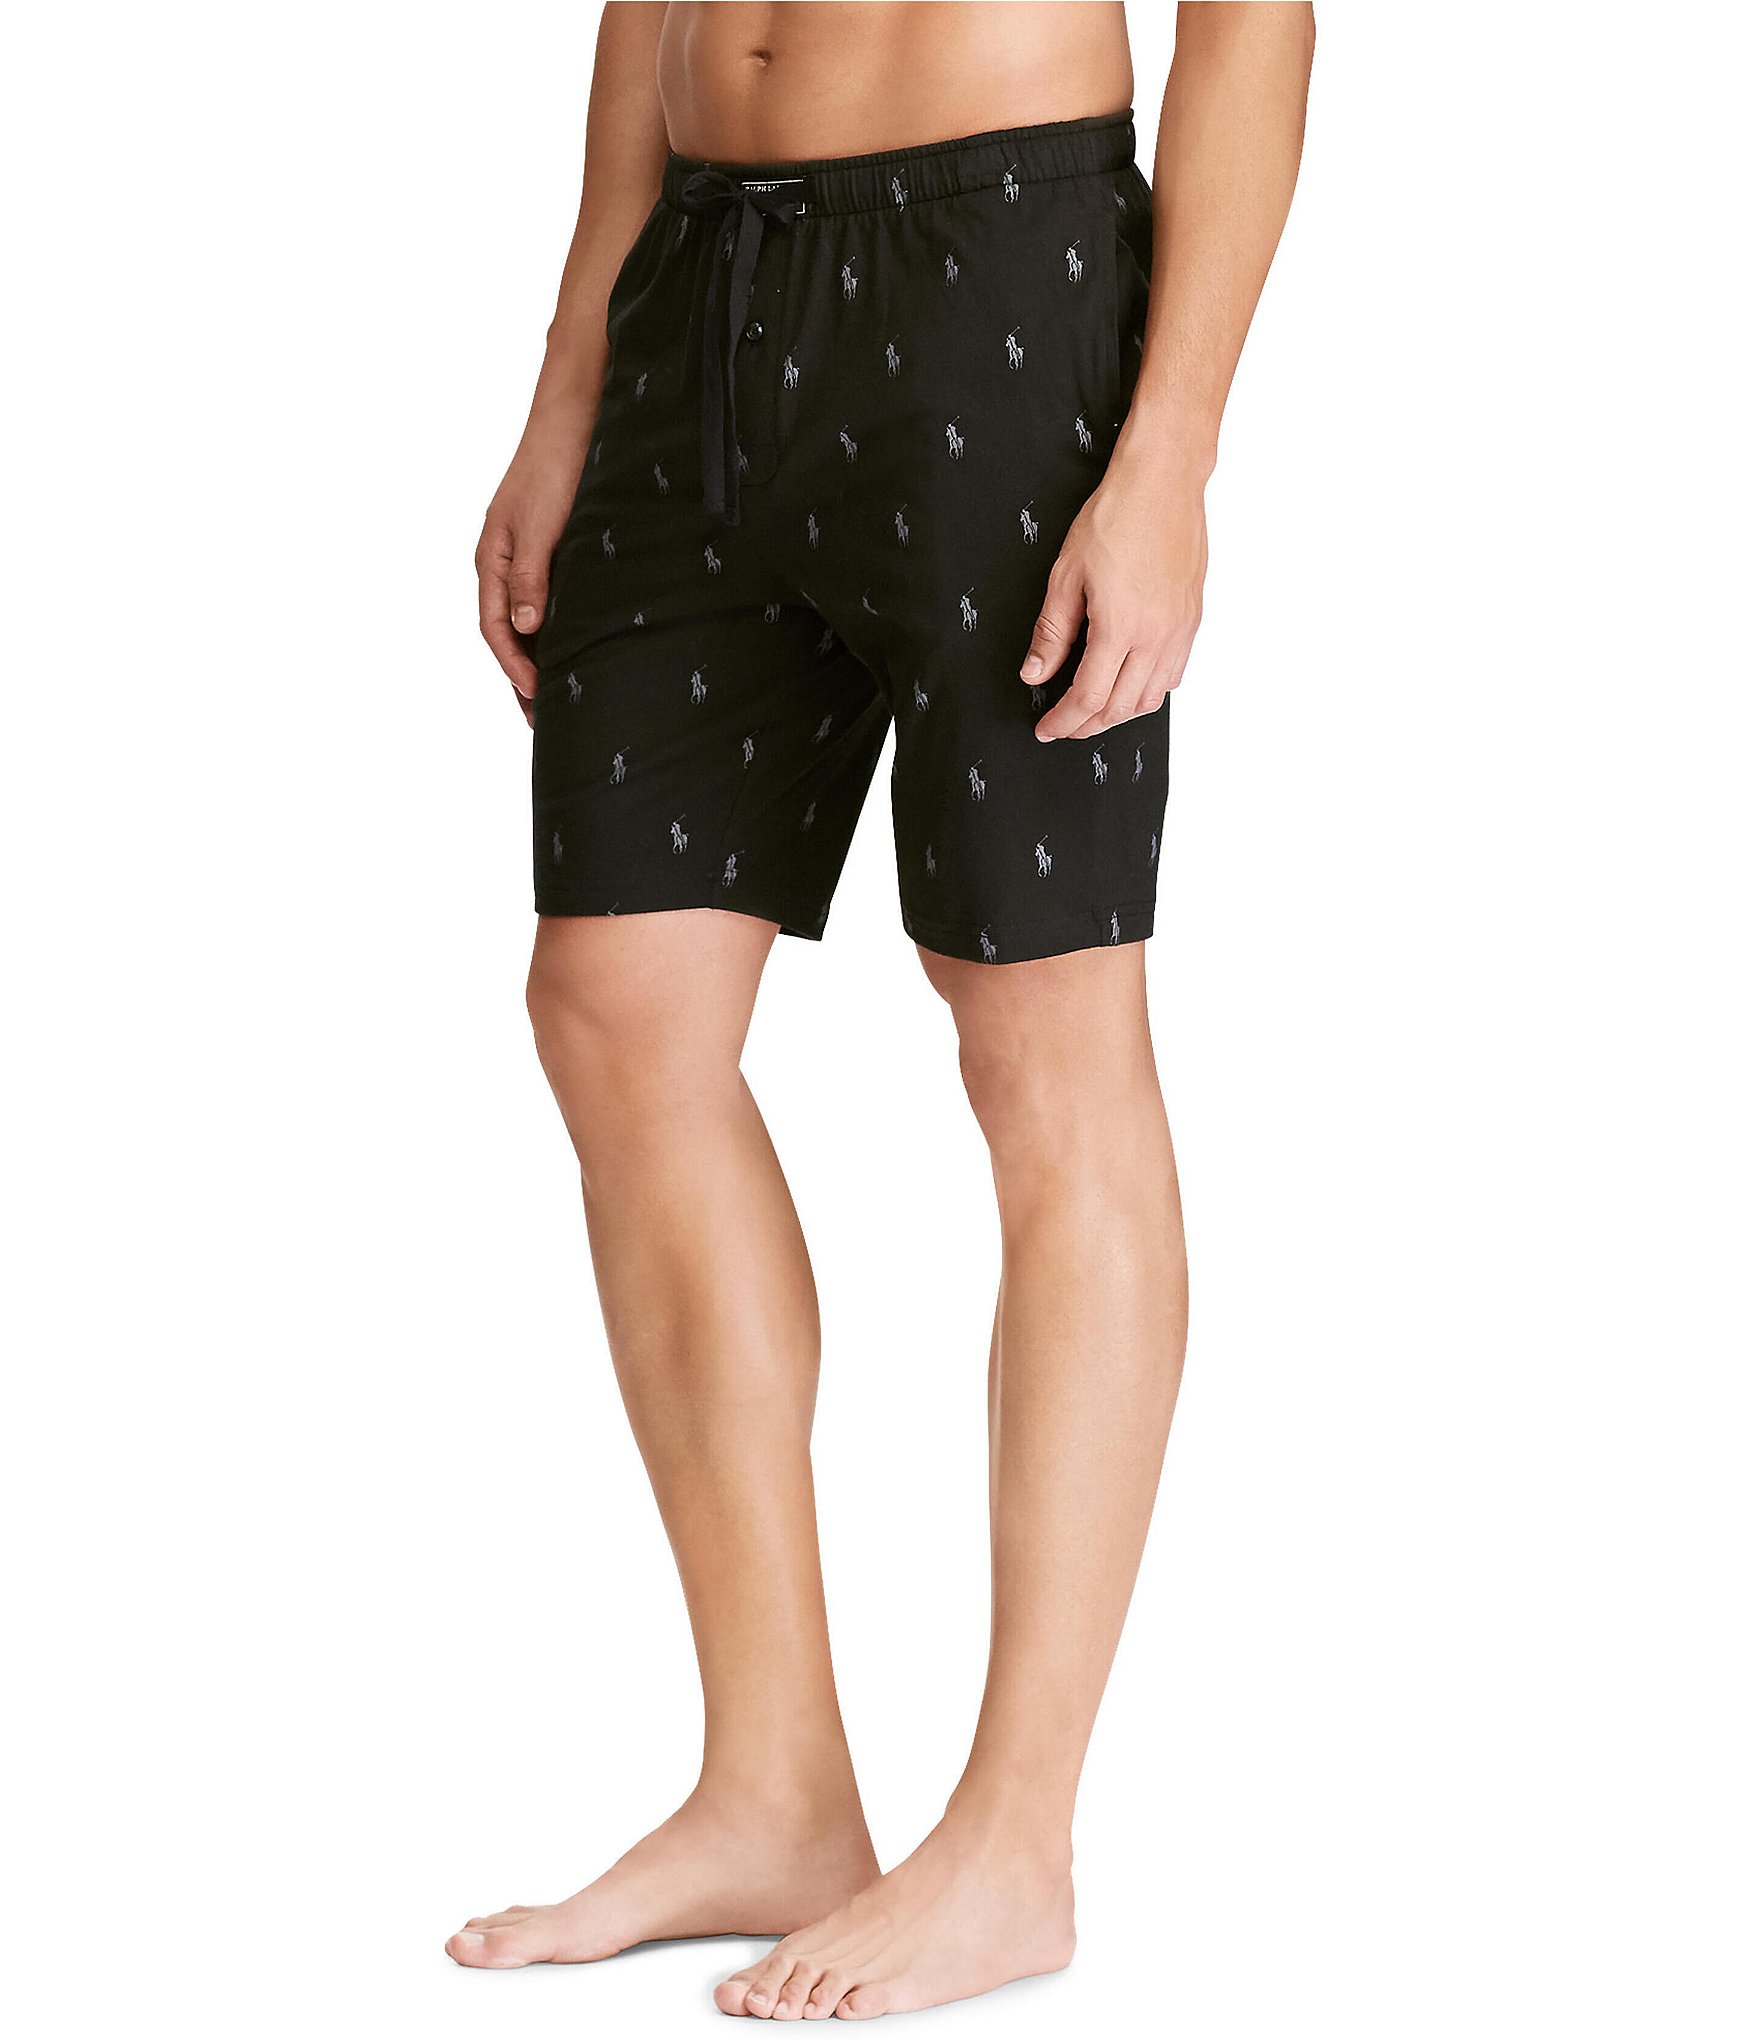 Over Polo Player Knit Pajama Shorts 